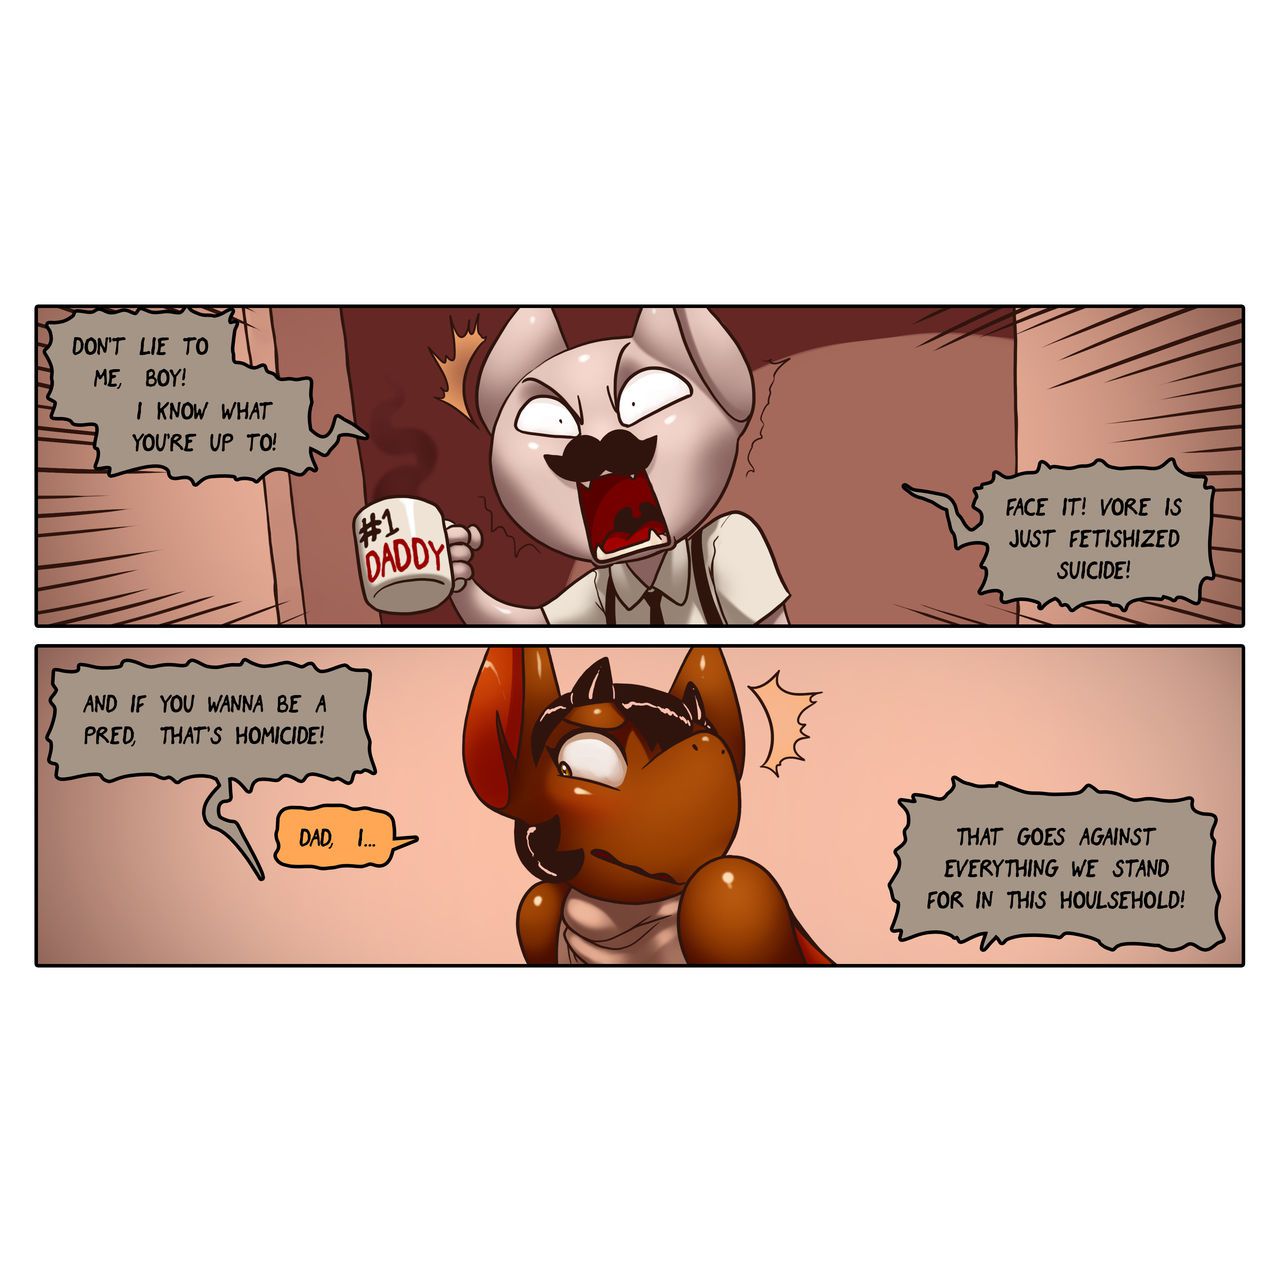 [James Howard] Vore Story- Chapter 4: The Necklace - WEB PAGES(WIP) 3